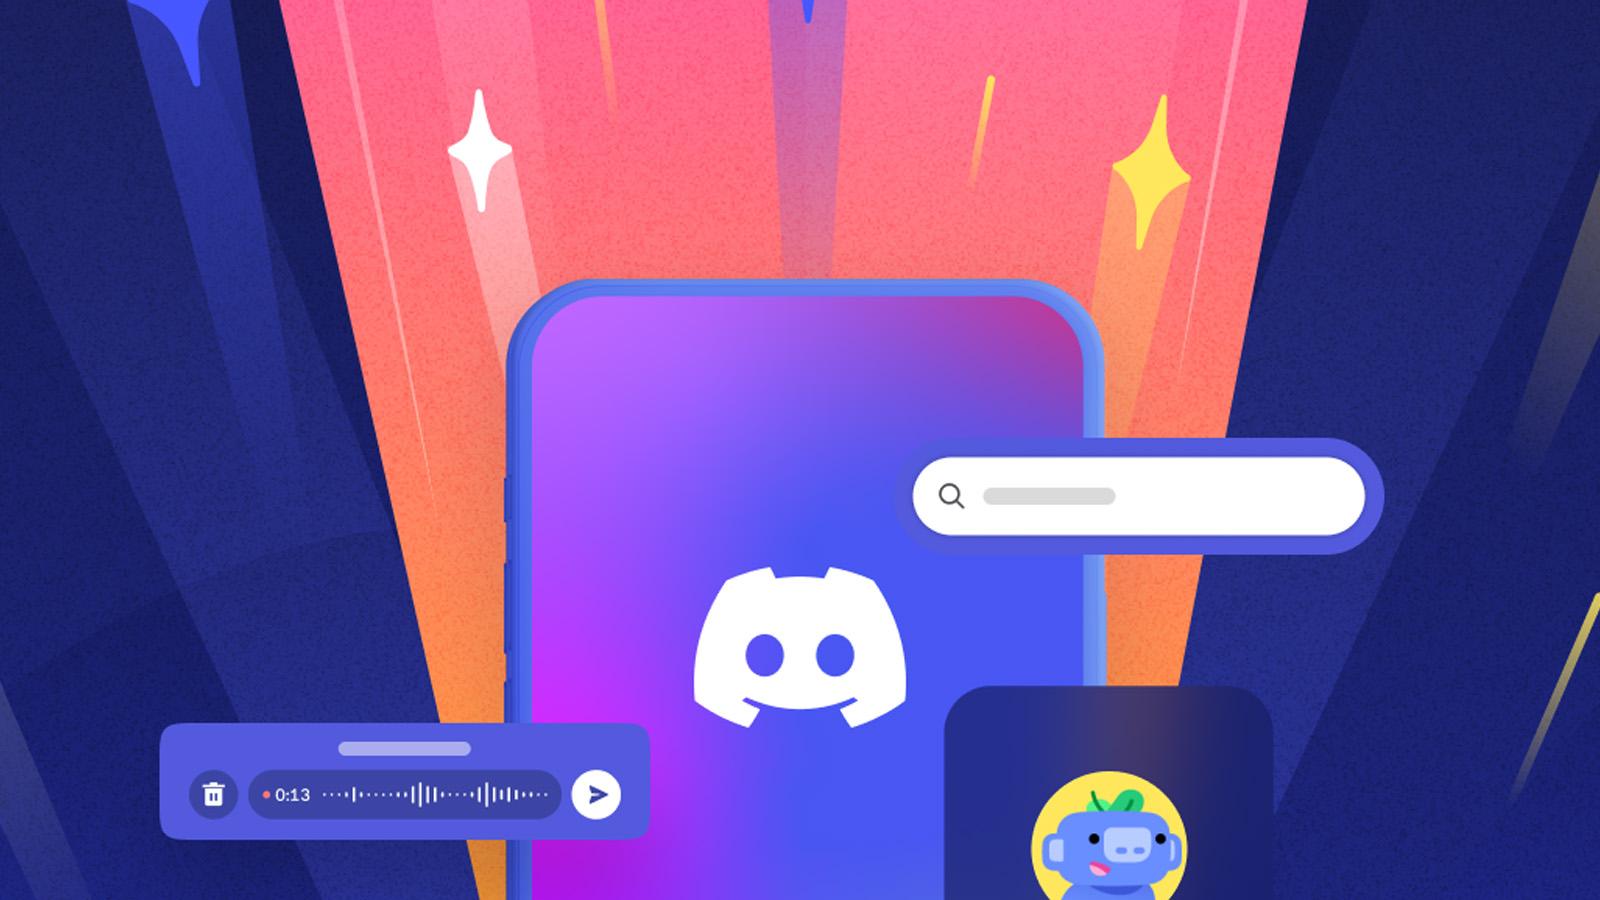 Discord fixes major design complaint with new mobile layout as it